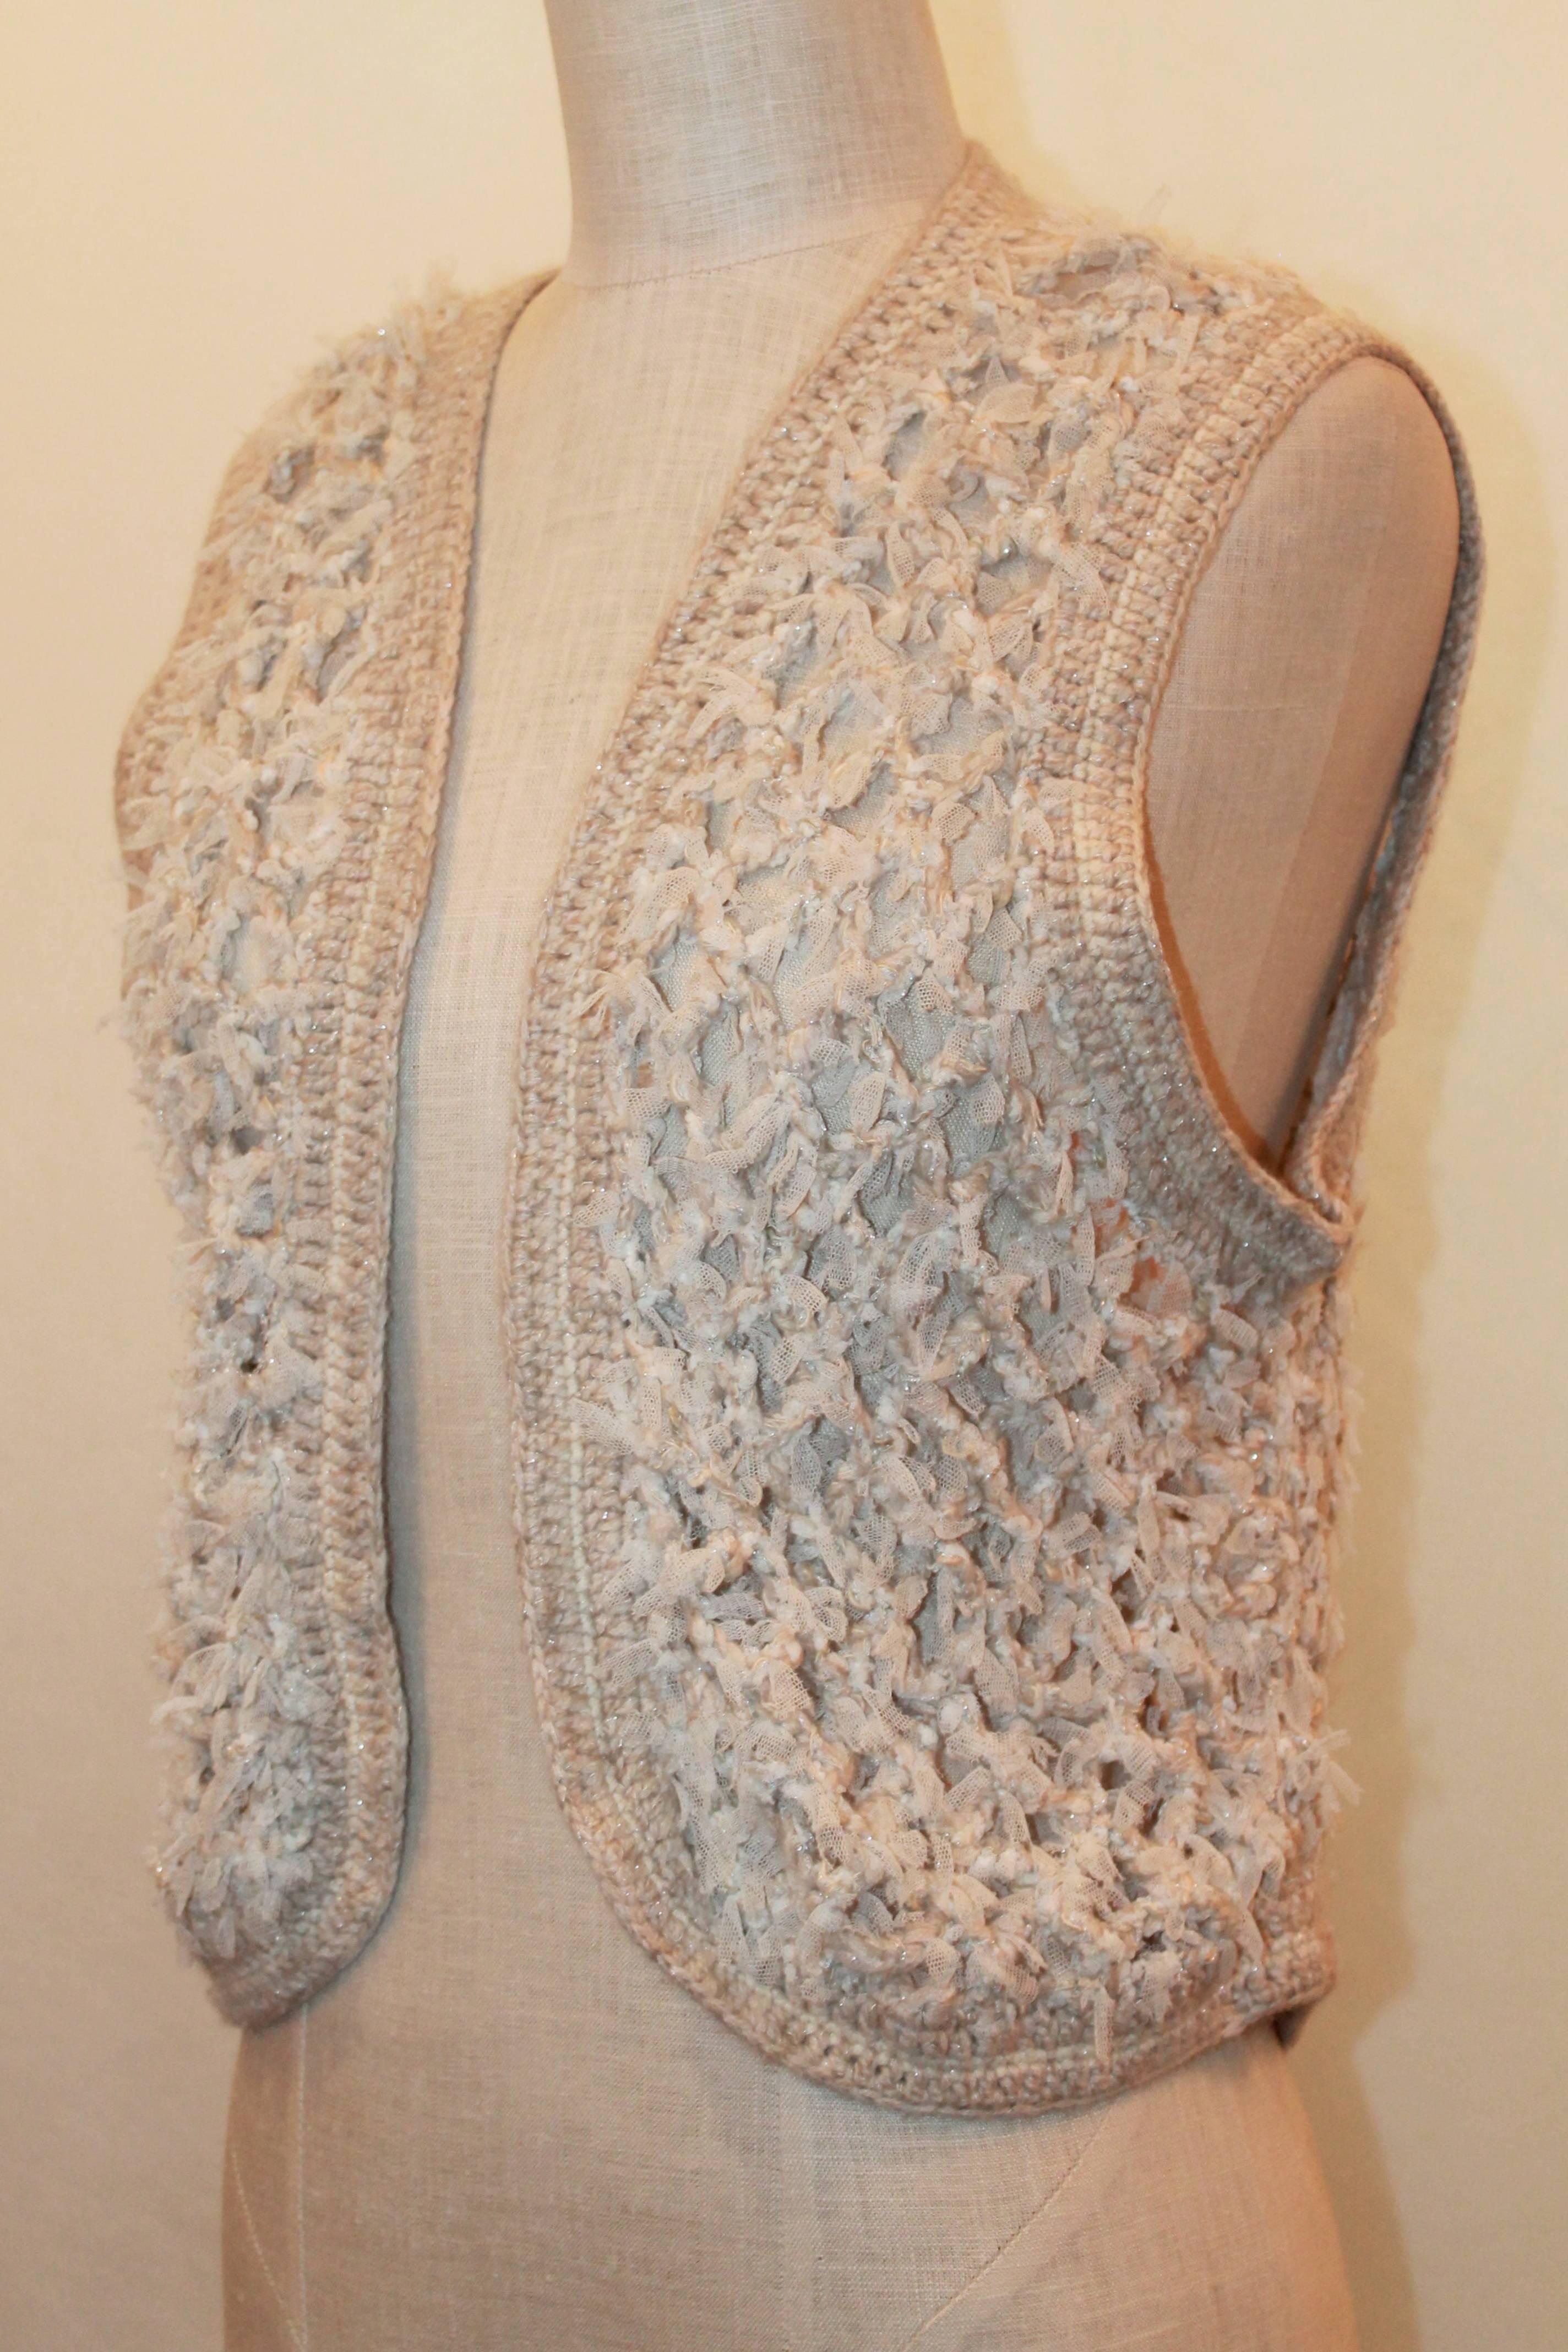 Chanel Ivory & Shimmer Cashmere Crochet Vest with Beige Trim & Fringe- 40 - circa 2005. This vest is in excellent condition and has a knitted trim. The piece also has mesh threading with some shimmery threading. 

Measurements: (with vest closed,